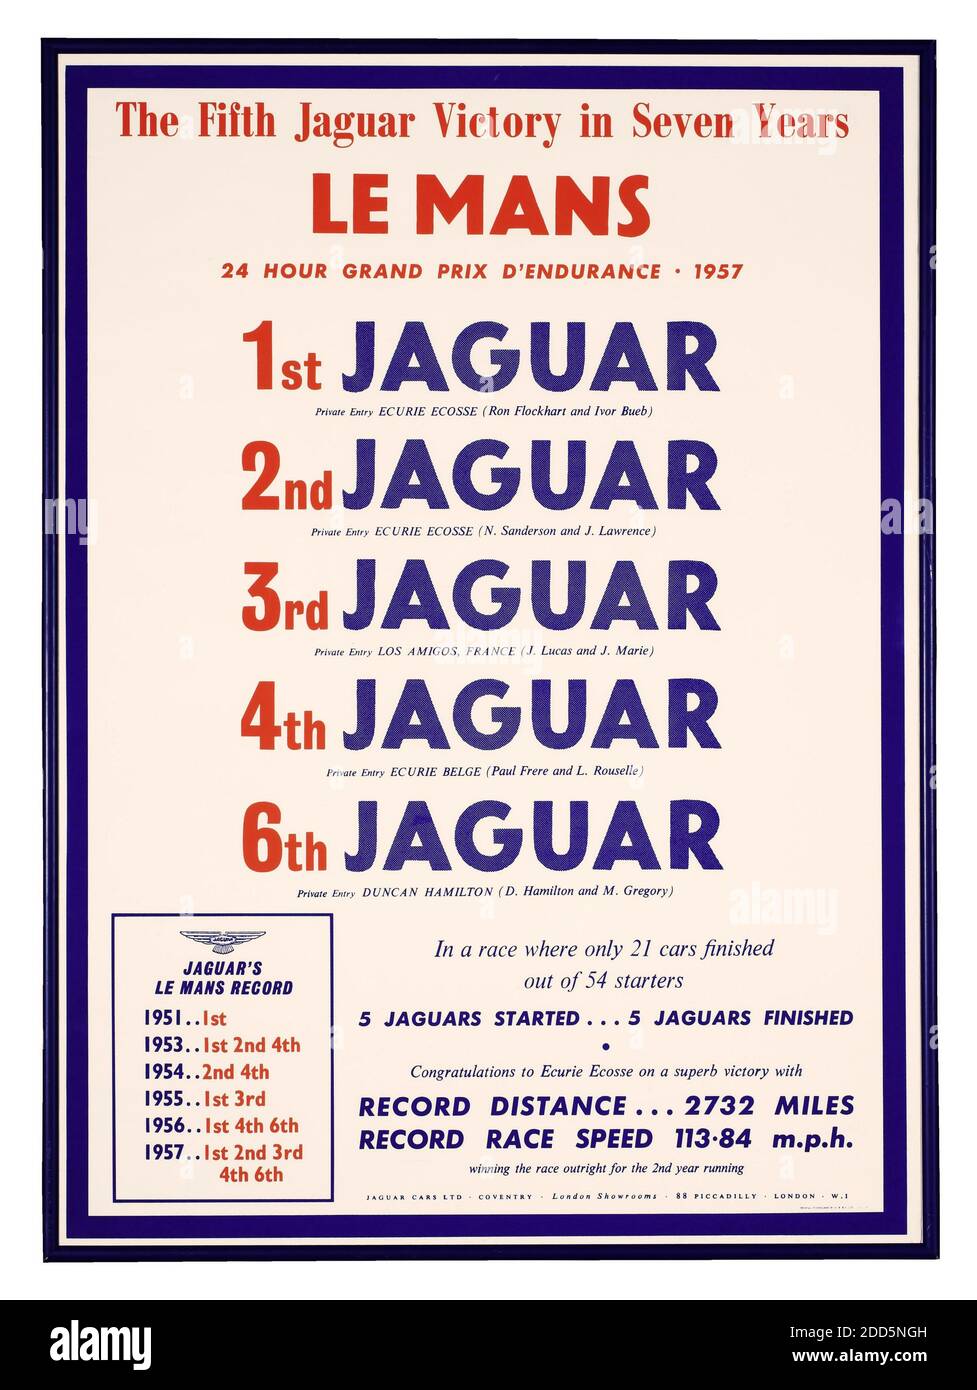 JAGUAR Vintage 1957 Le Mans 24 hrs race with Jaguar victories 1st to 6th 'The Fifth Jaguar Victory in Seven Years', Le Mans, poster printed in England by B & S Ltd for Jaguar Cars Limited 1957 - 2732 miles race speed average 113.84 mph Stock Photo